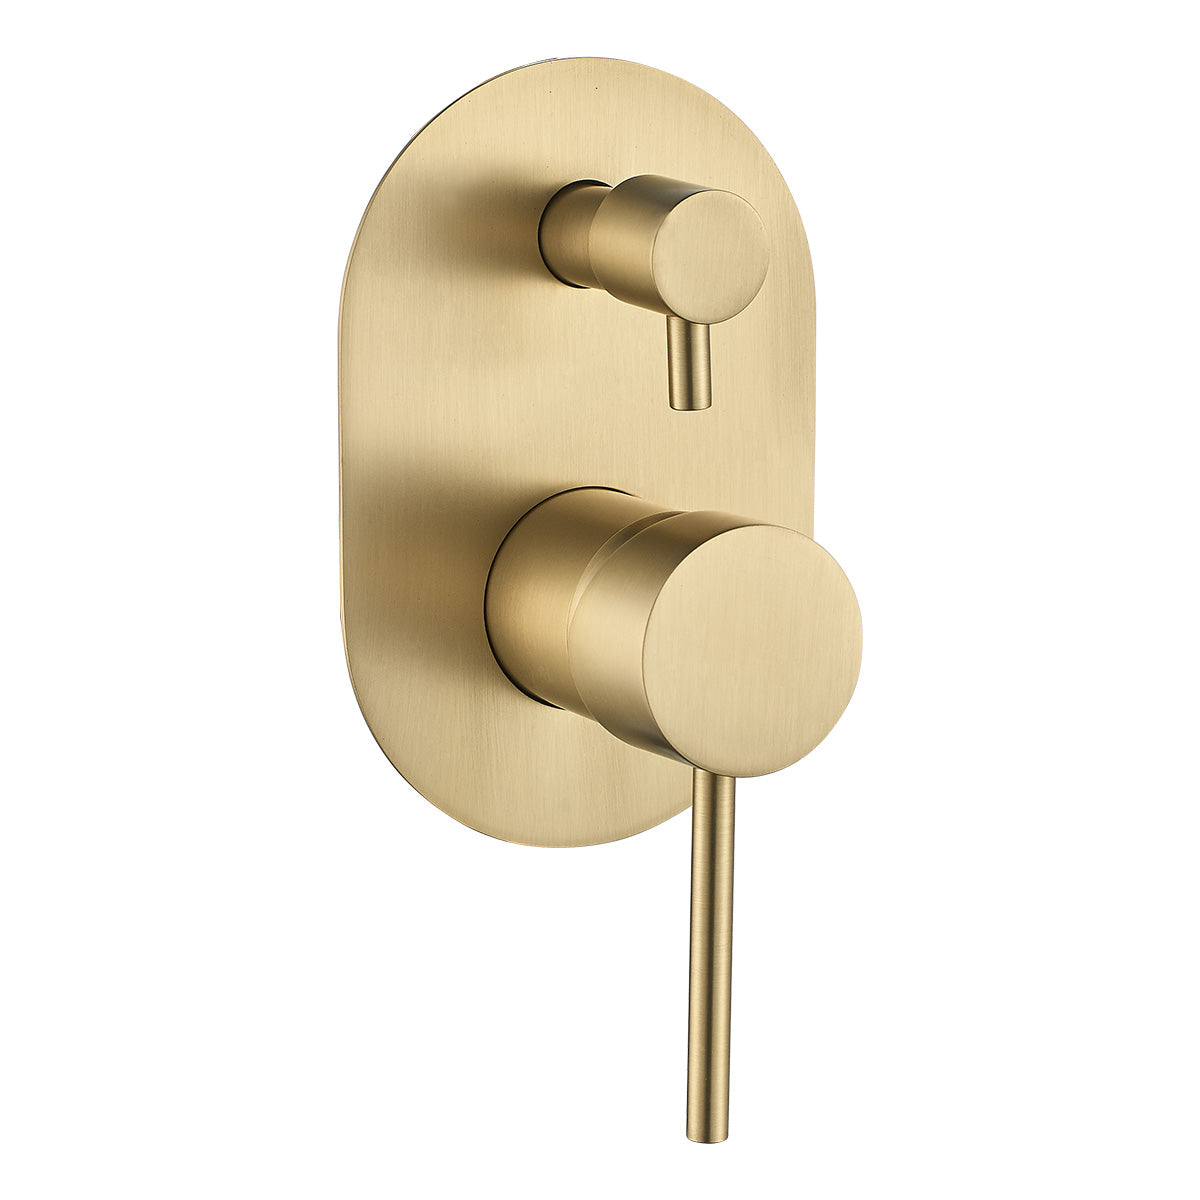 IDWD2 (BG) / Ideal Wall Mixer With Diverter (Brushed Gold) - Hellycar Brushed Gold Shower Mixer With Diverter